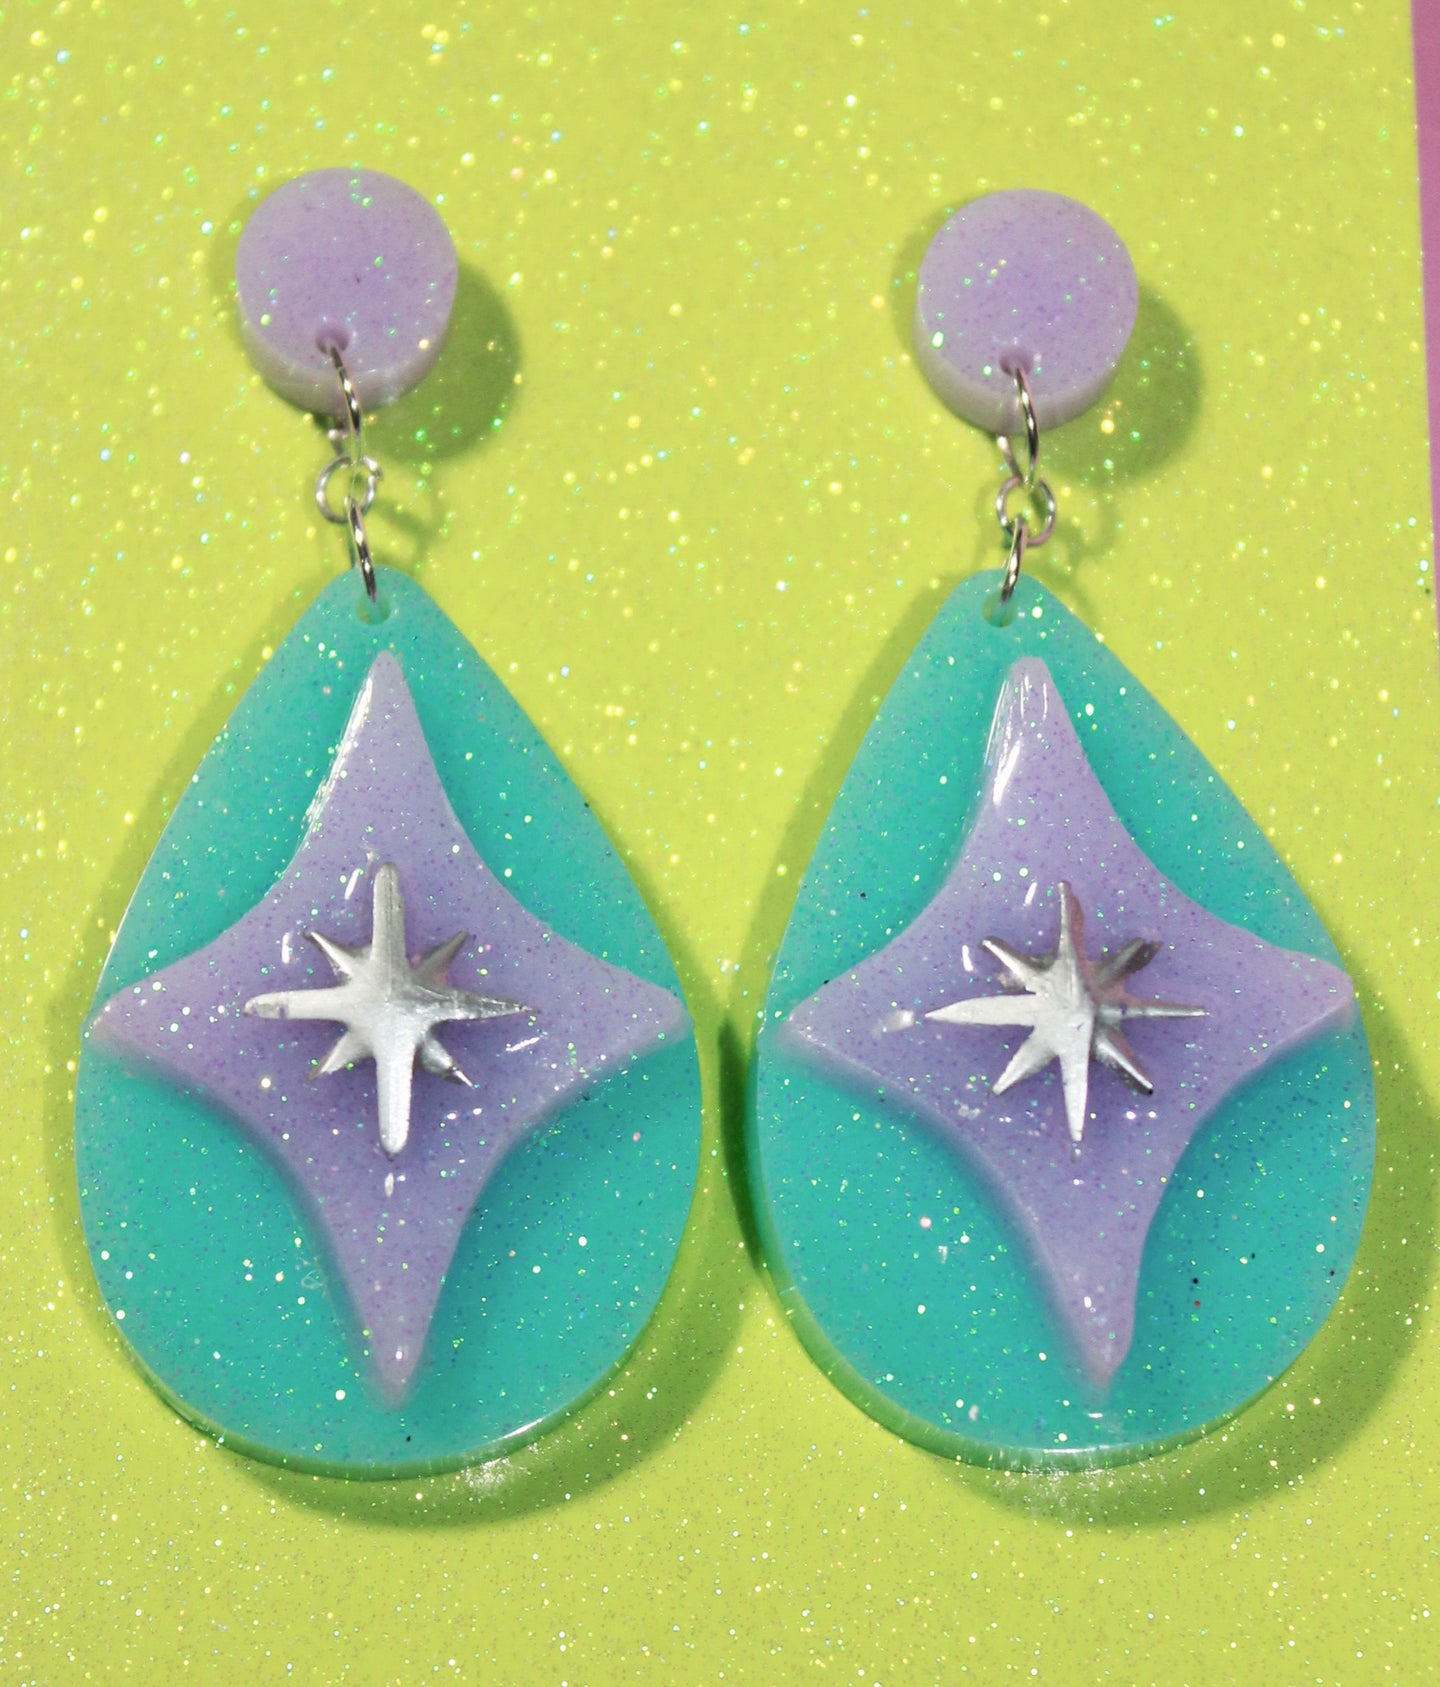 These Vagabond retro inspired earrings in purple and turquoise